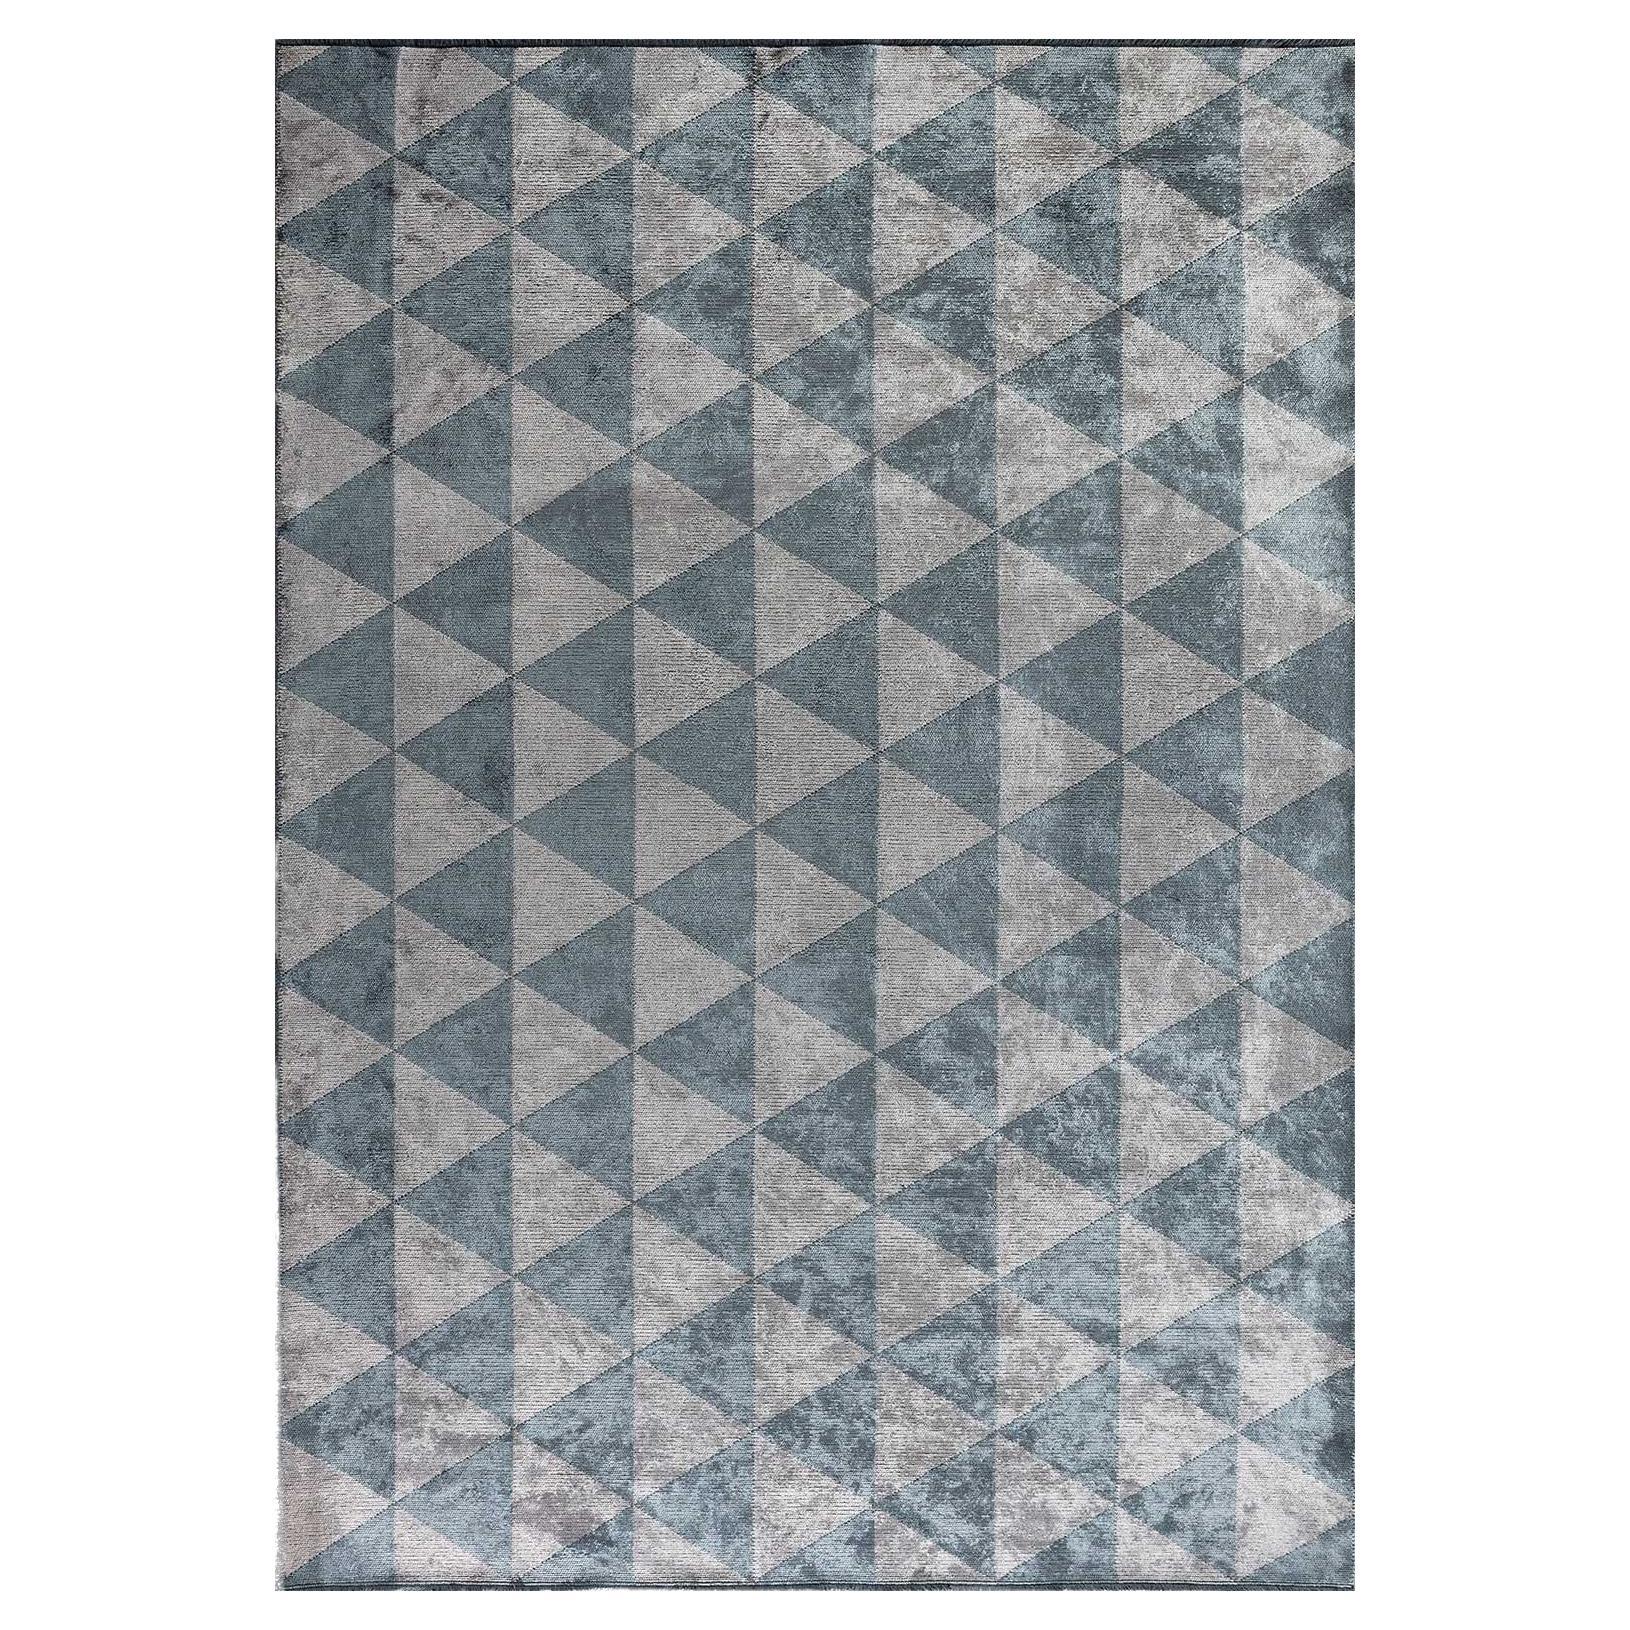 Silver Gray and Light Blue and Triangle Diamond Geometric Pattern Rug with Shine For Sale